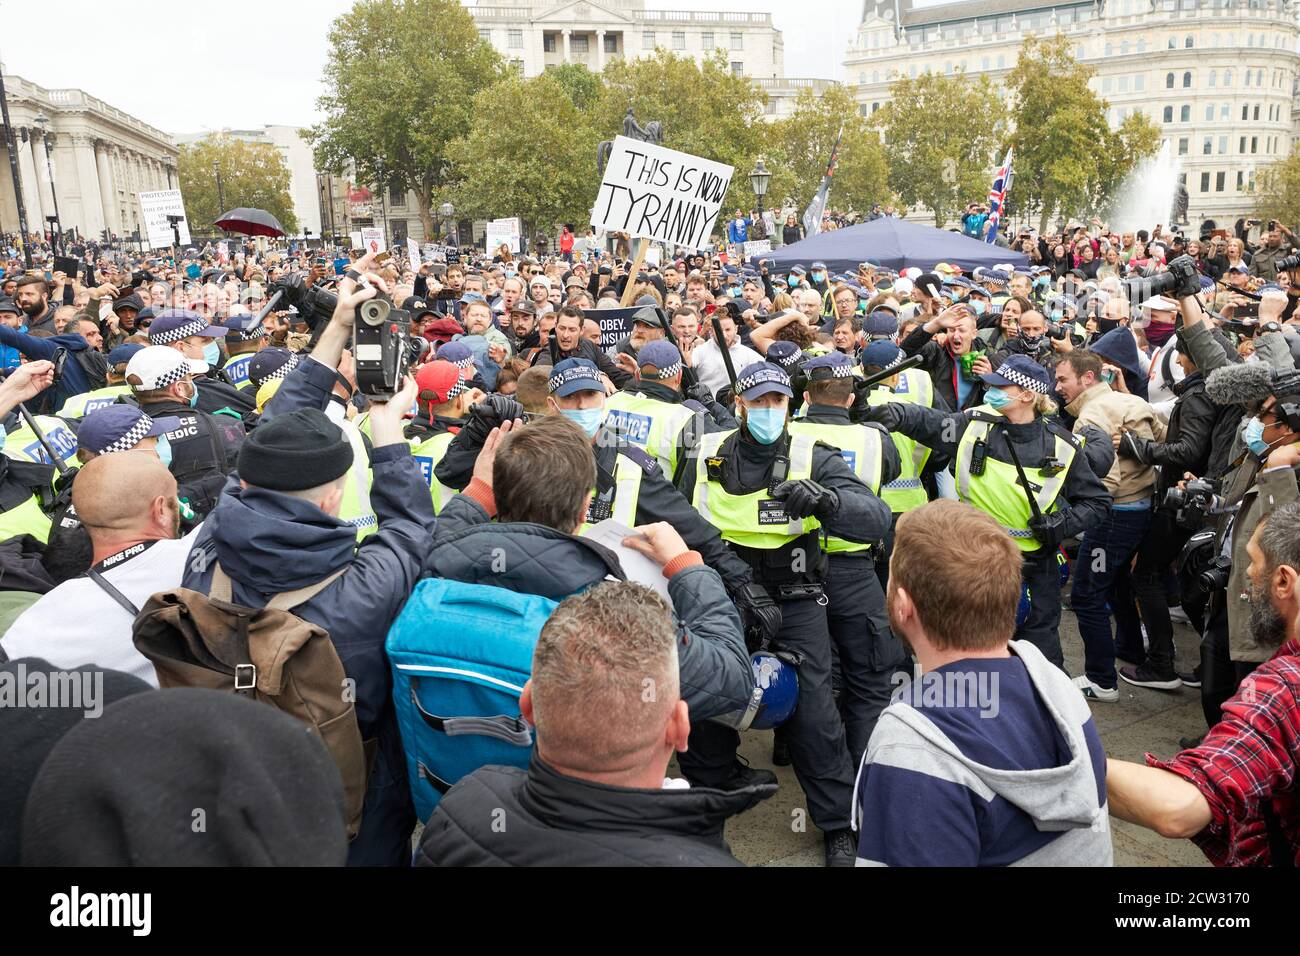 London, UK. - 26 Sept 2020: Police clash with demonstrators at a protest in Trafalgar Square against coronavirus restrictions. Stock Photo